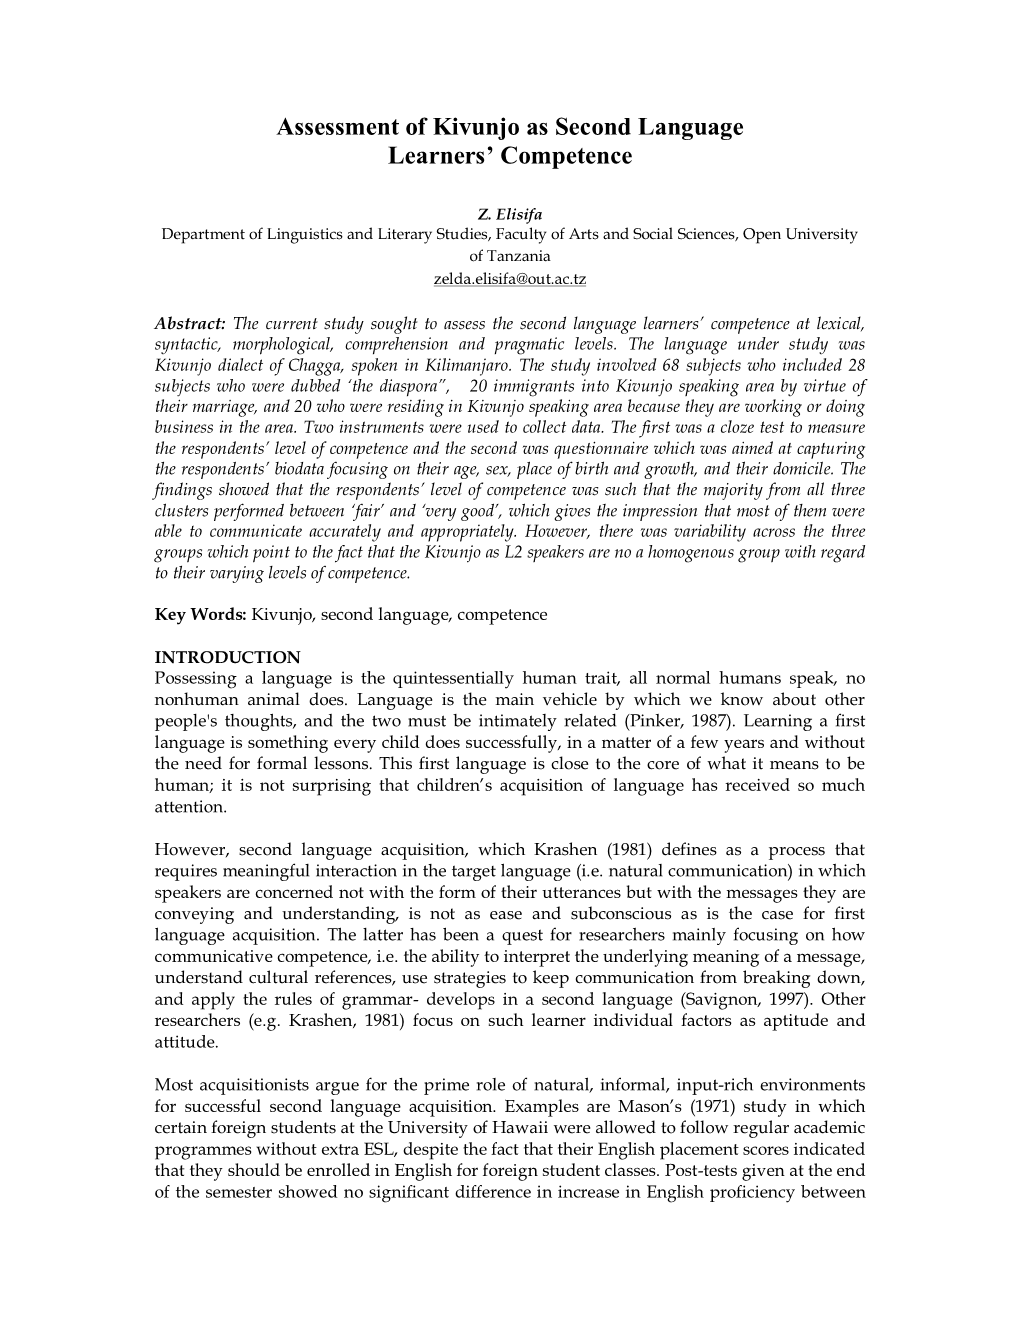 Assessment of Kivunjo As Second Language Learners' Competence